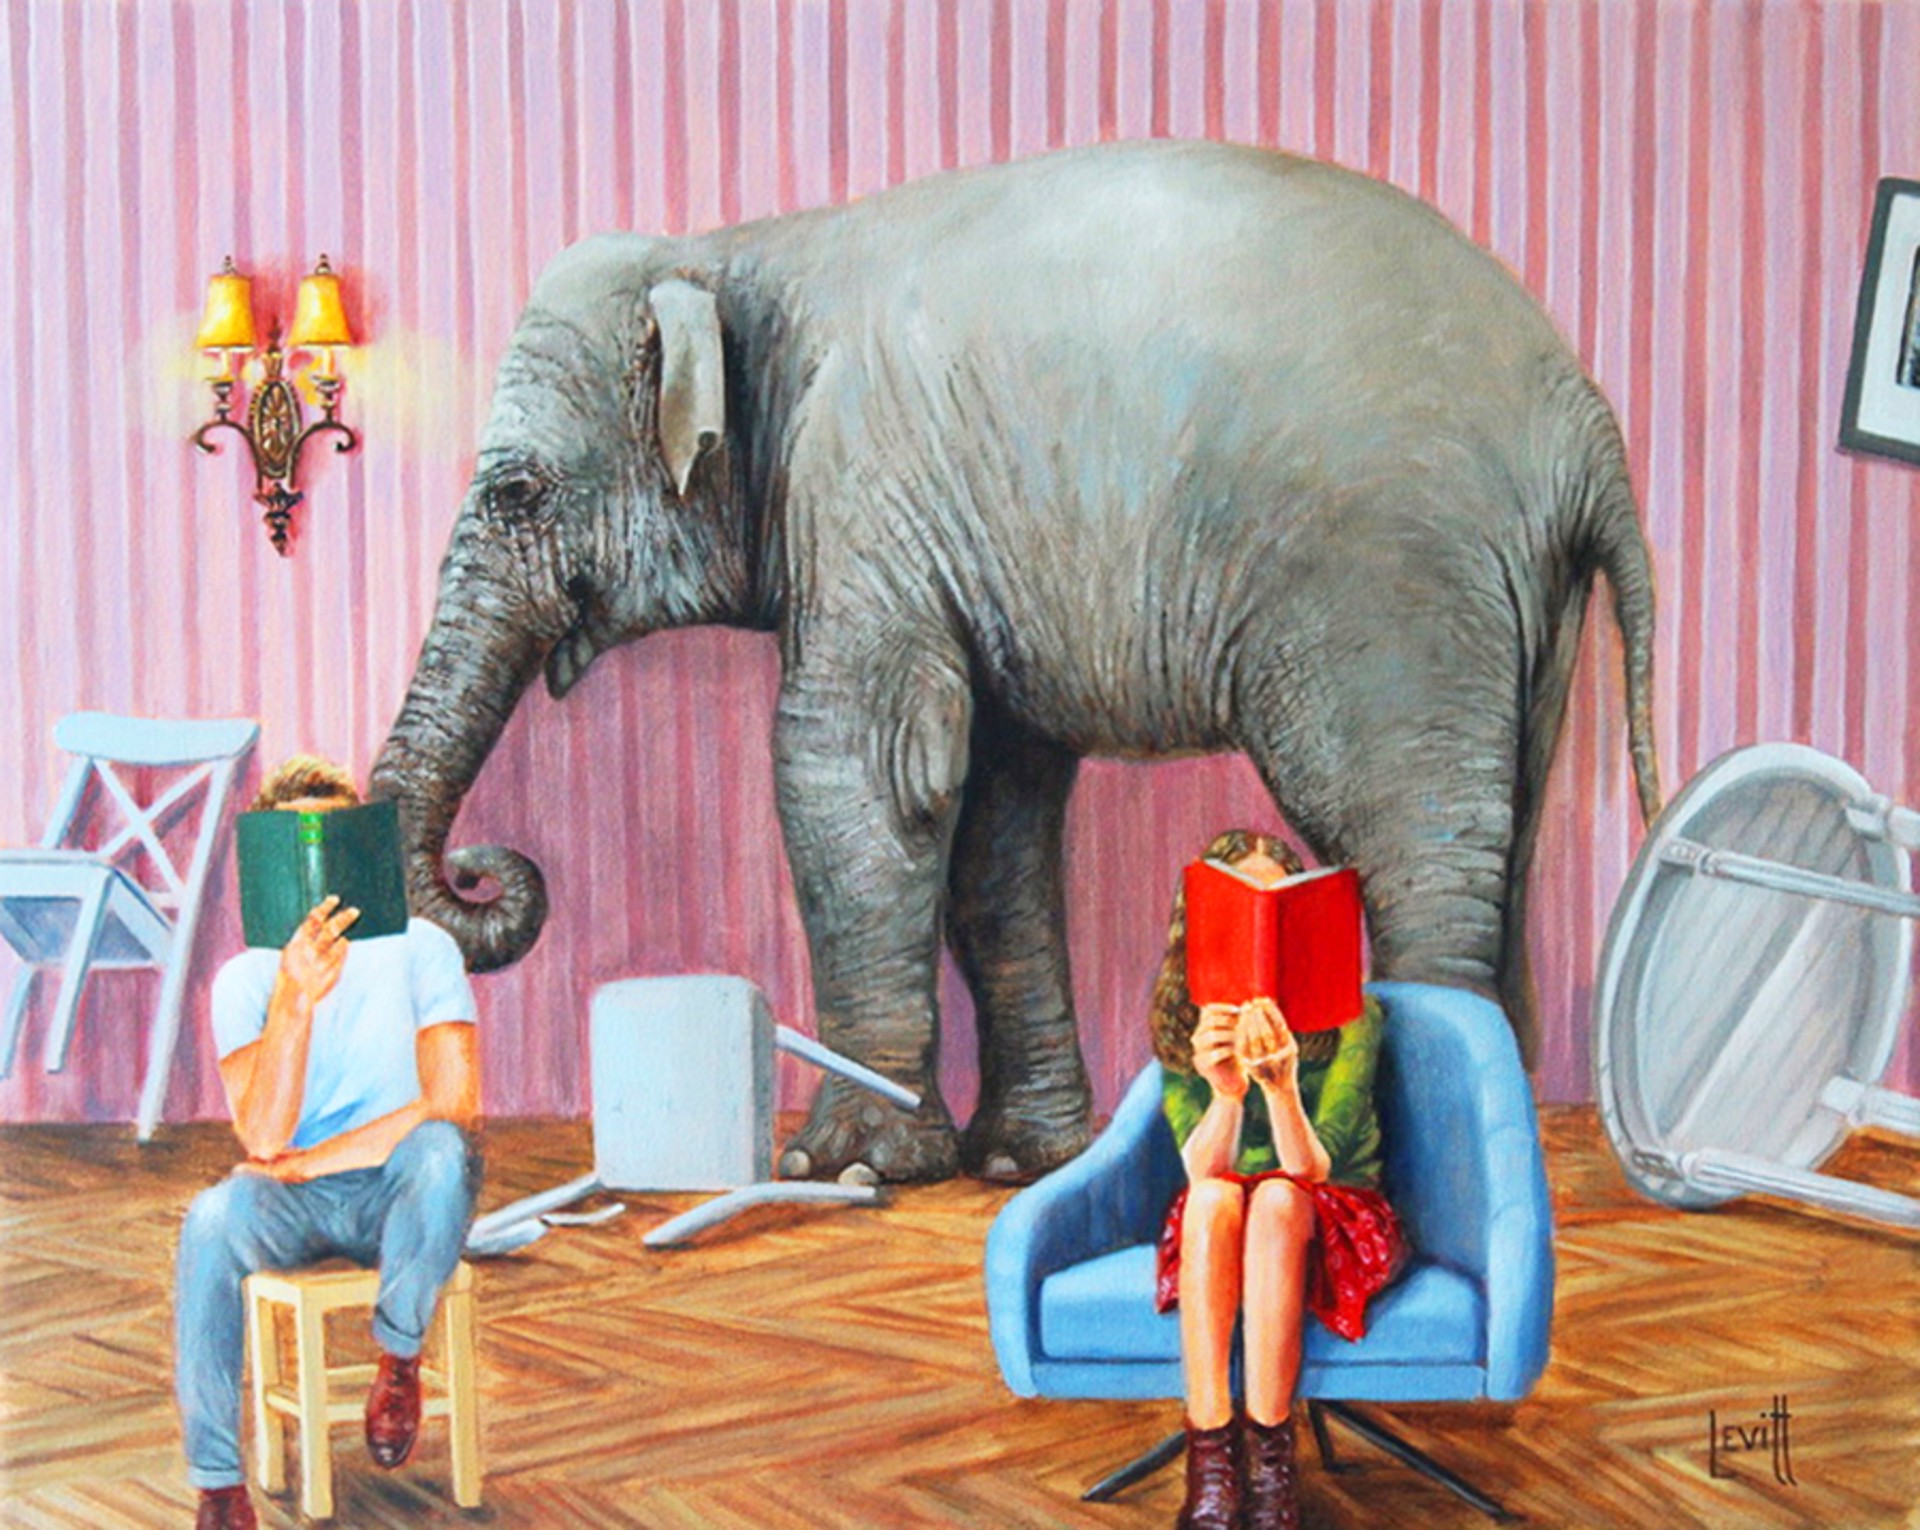 The Elephant In The Room by Barney Levitt